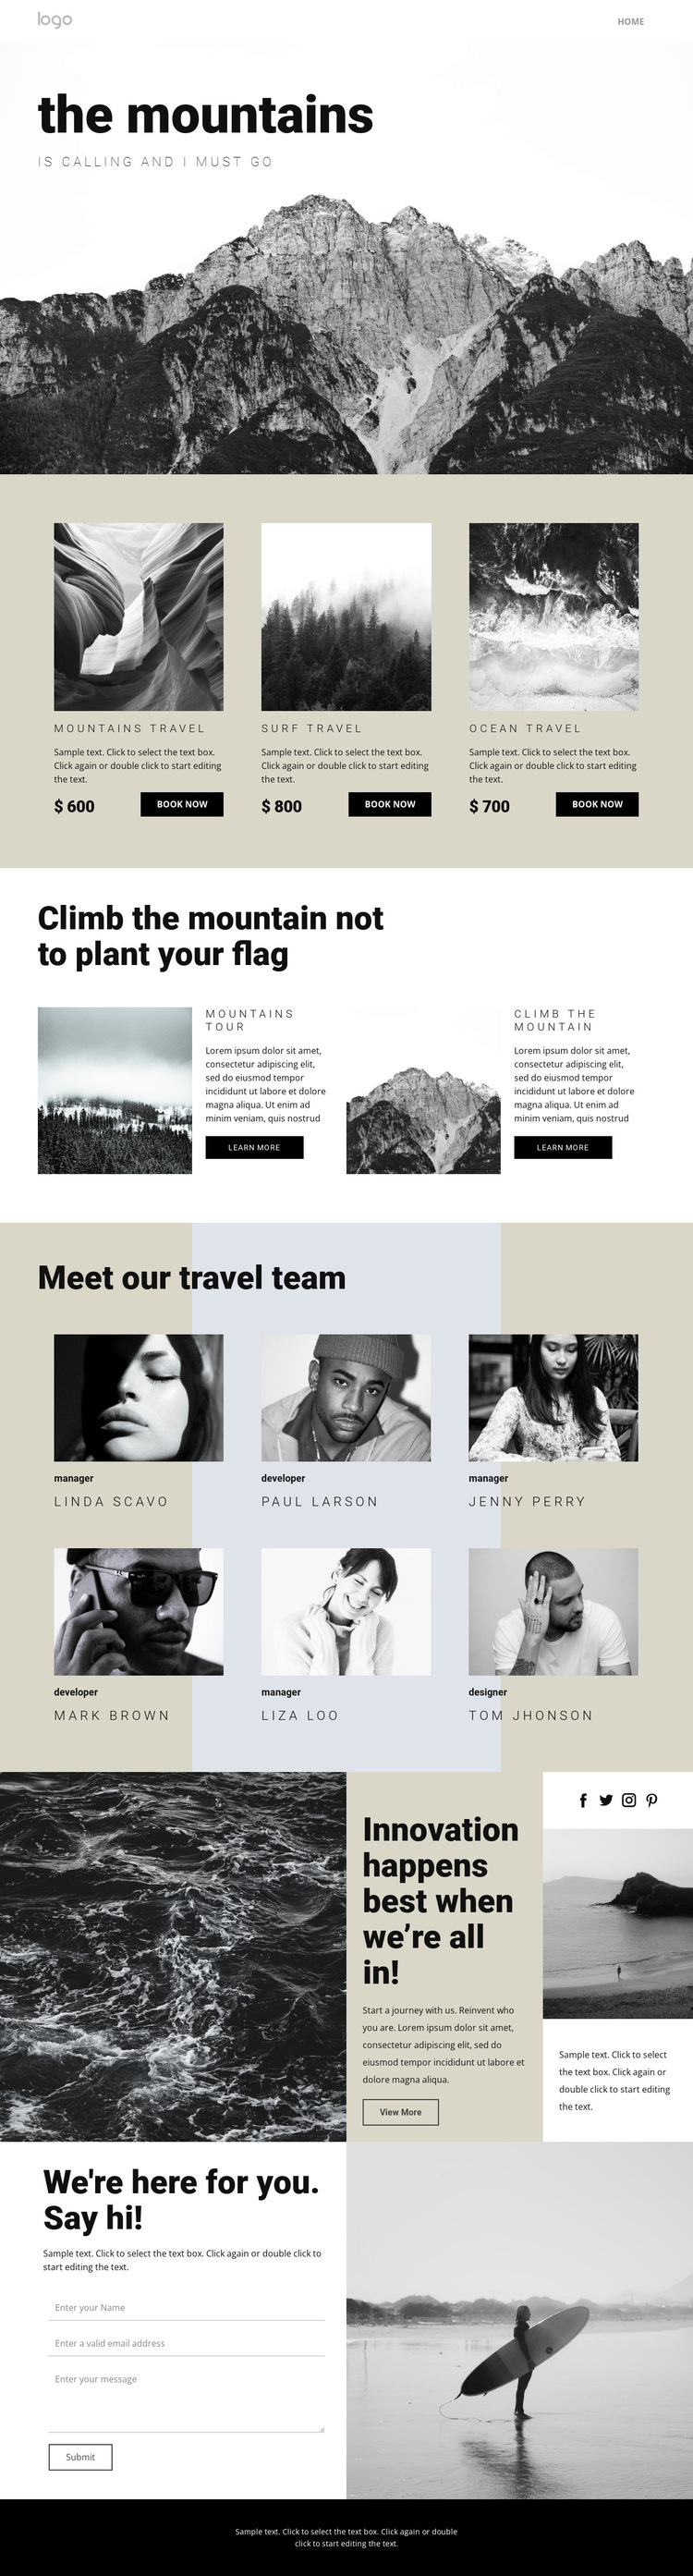 Agency for people who travel HTML5 Template